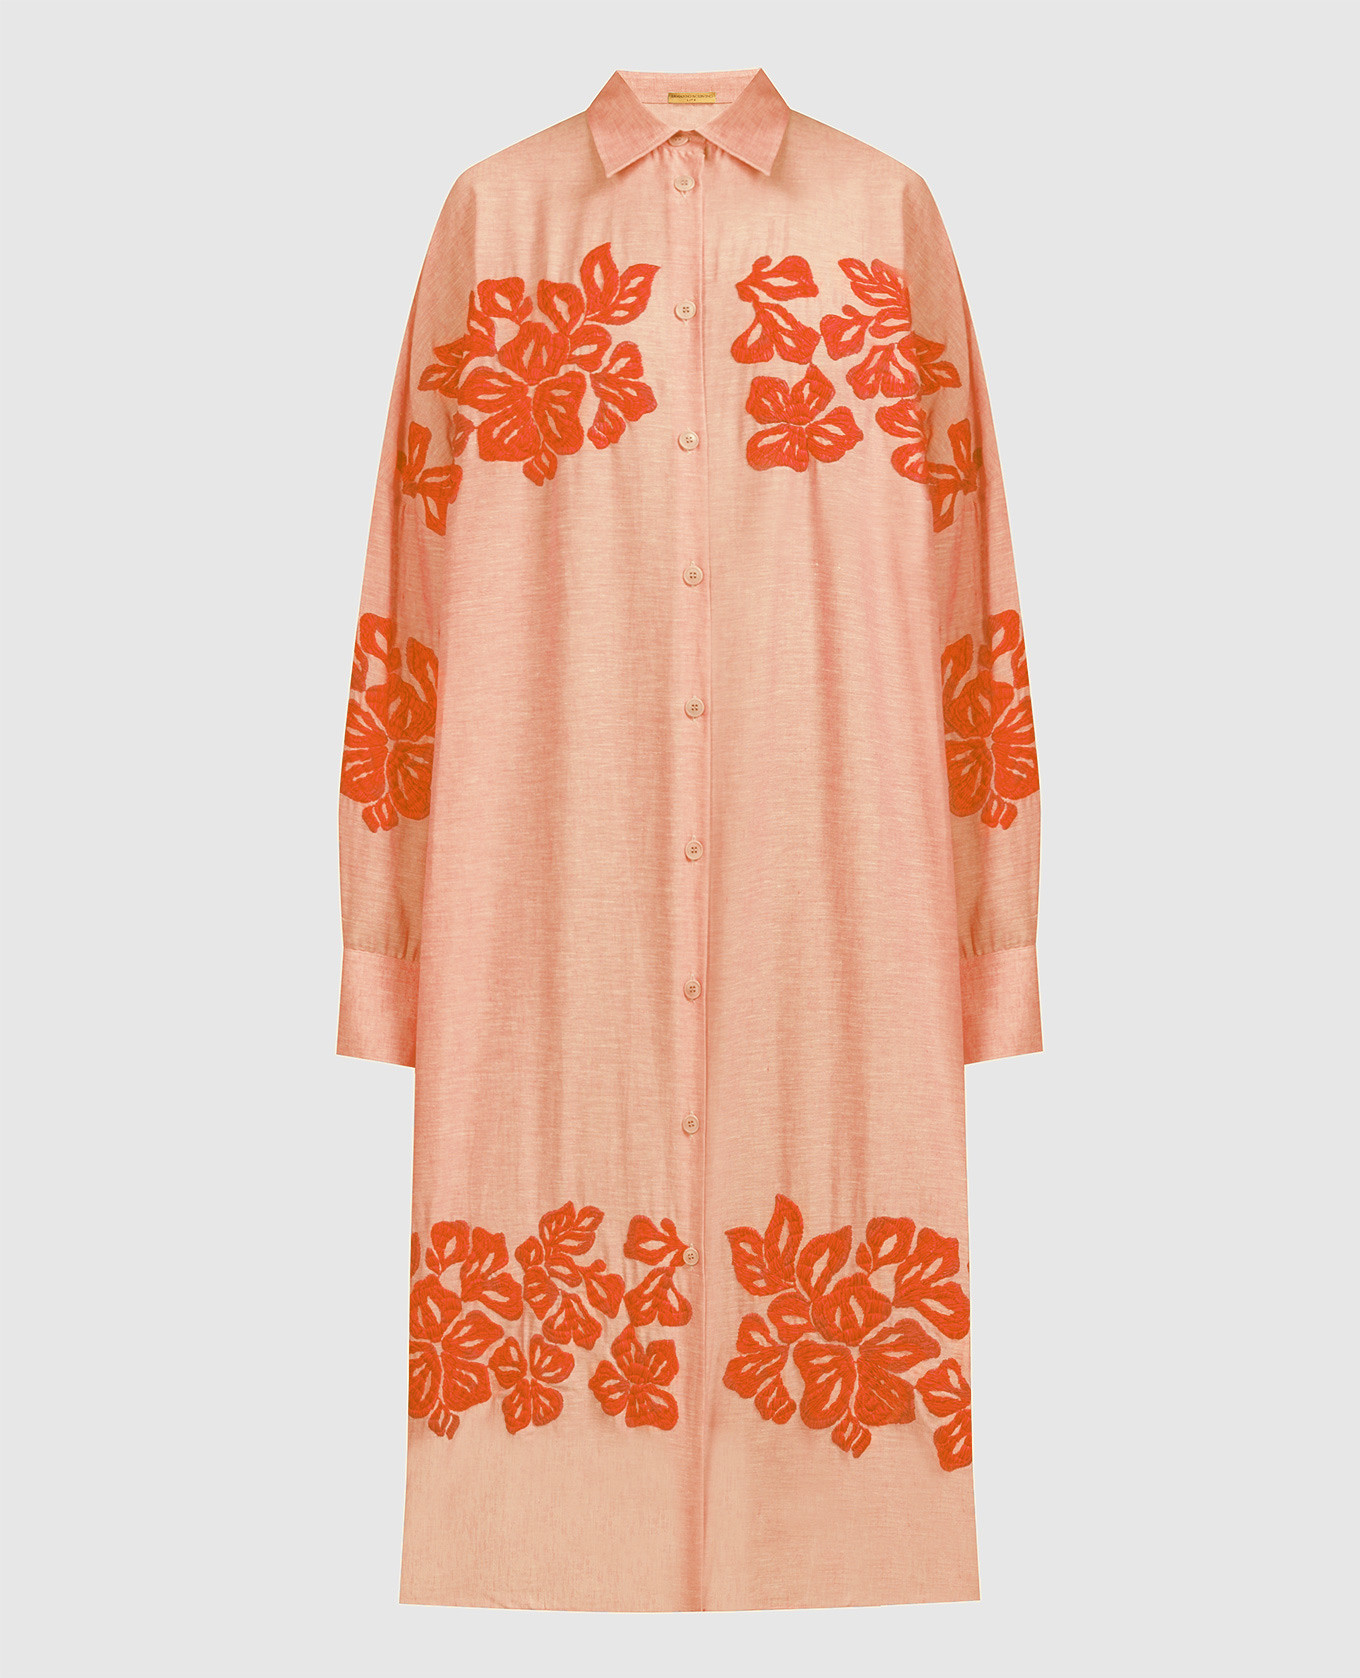 Orange linen shirt dress with embroidery